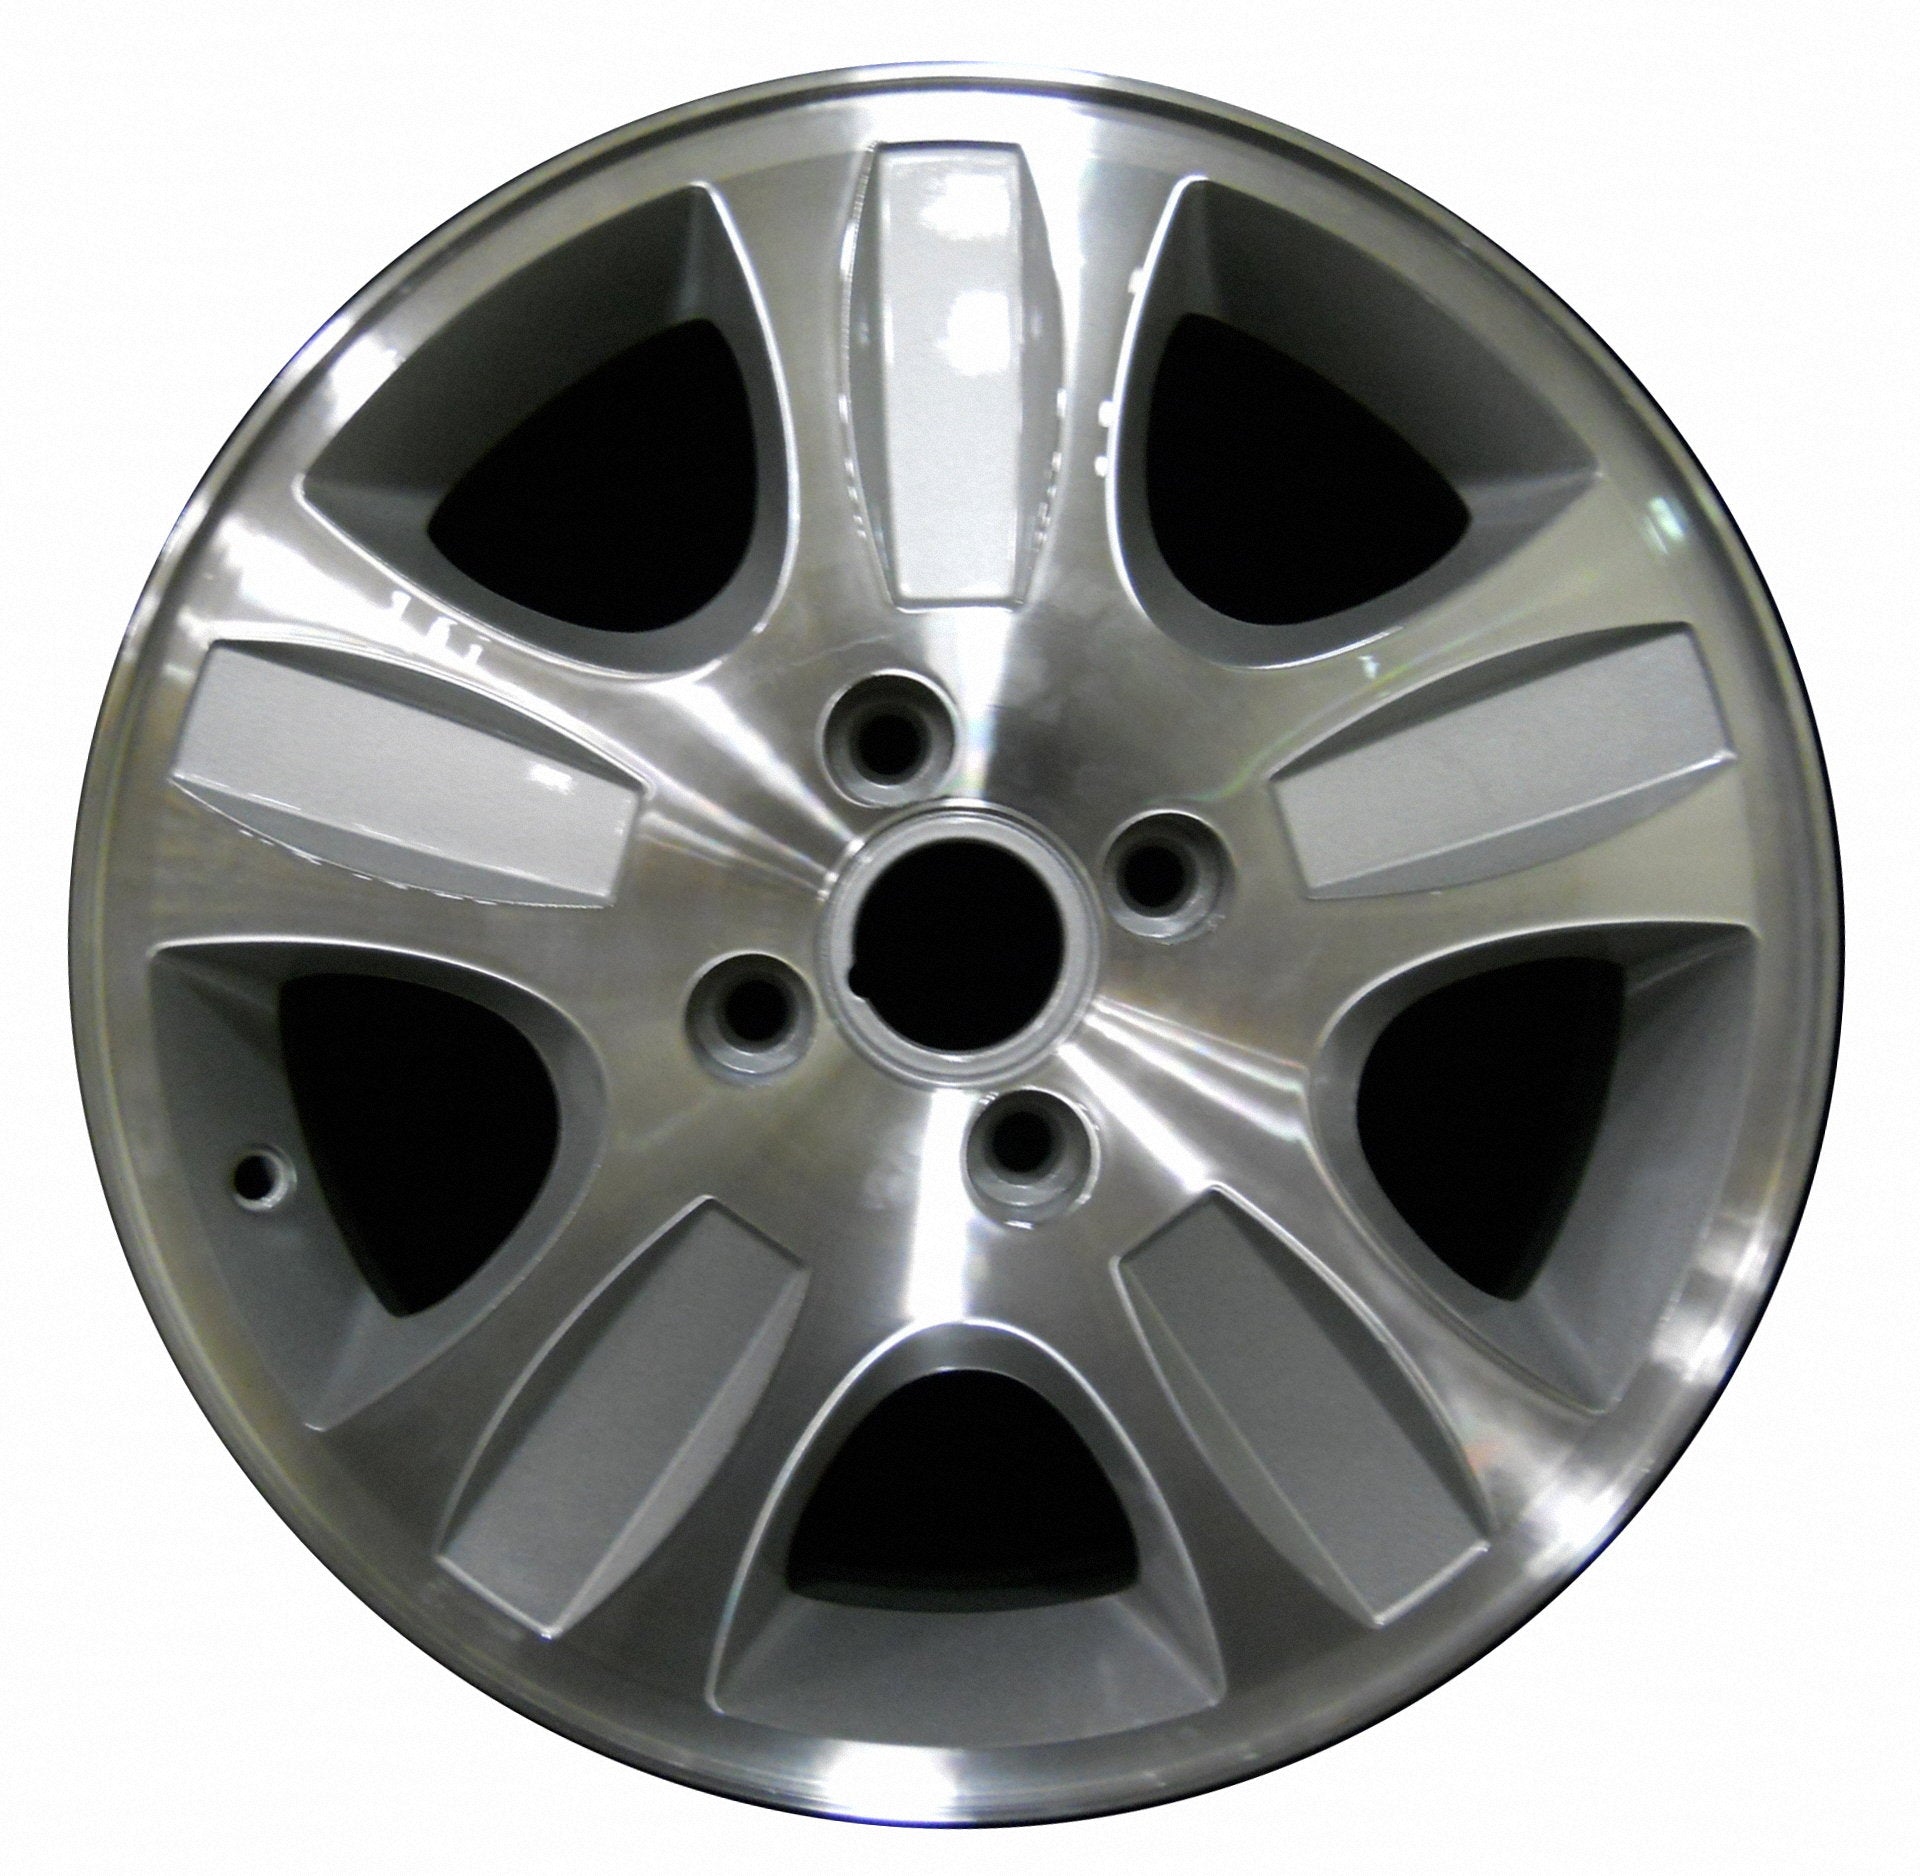 Ford Focus  2005, 2006, 2007 Factory OEM Car Wheel Size 16x6 Alloy WAO.3577.PS02.MA